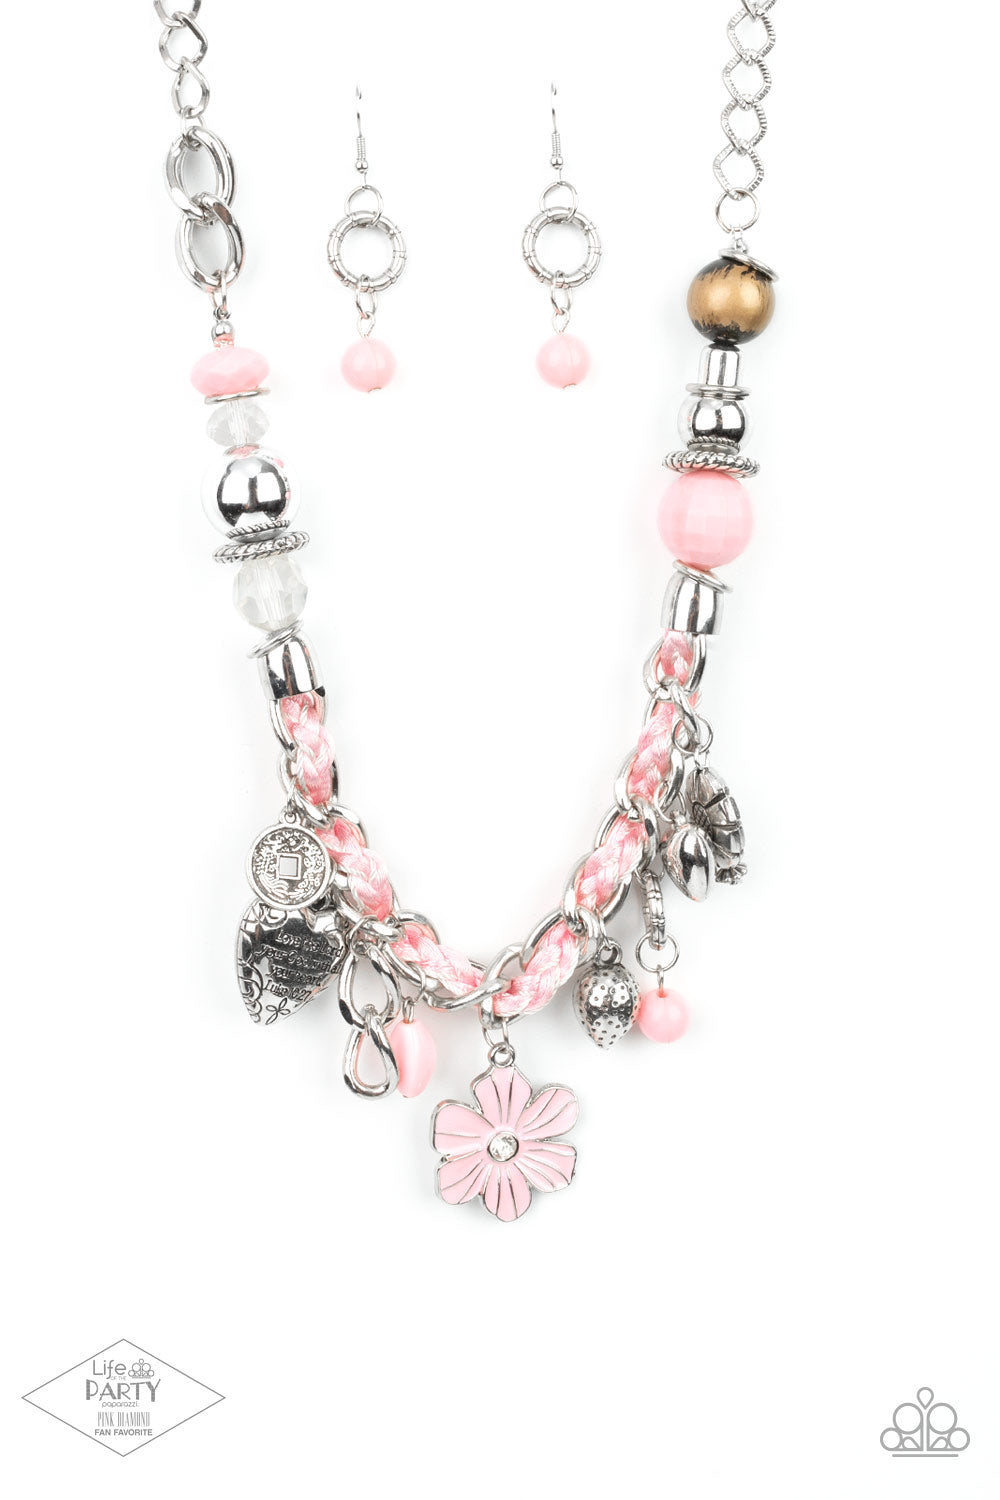 Charmed, I Am Sure Pink Necklace - Paparazzi Accessories  Pink cording is braided through a chunky silver chain. A unique variety of charms decorate the piece including a delicate flower and a heart inscribed with the phrase "With All My Heart" on one side and a short bible verse on the other that reads, "Love the Lord thy God with all your heart. Luke 10:27." Features an adjustable clasp closure.  All Paparazzi Accessories are lead free and nickel free!  Includes one pair of matching earrings.